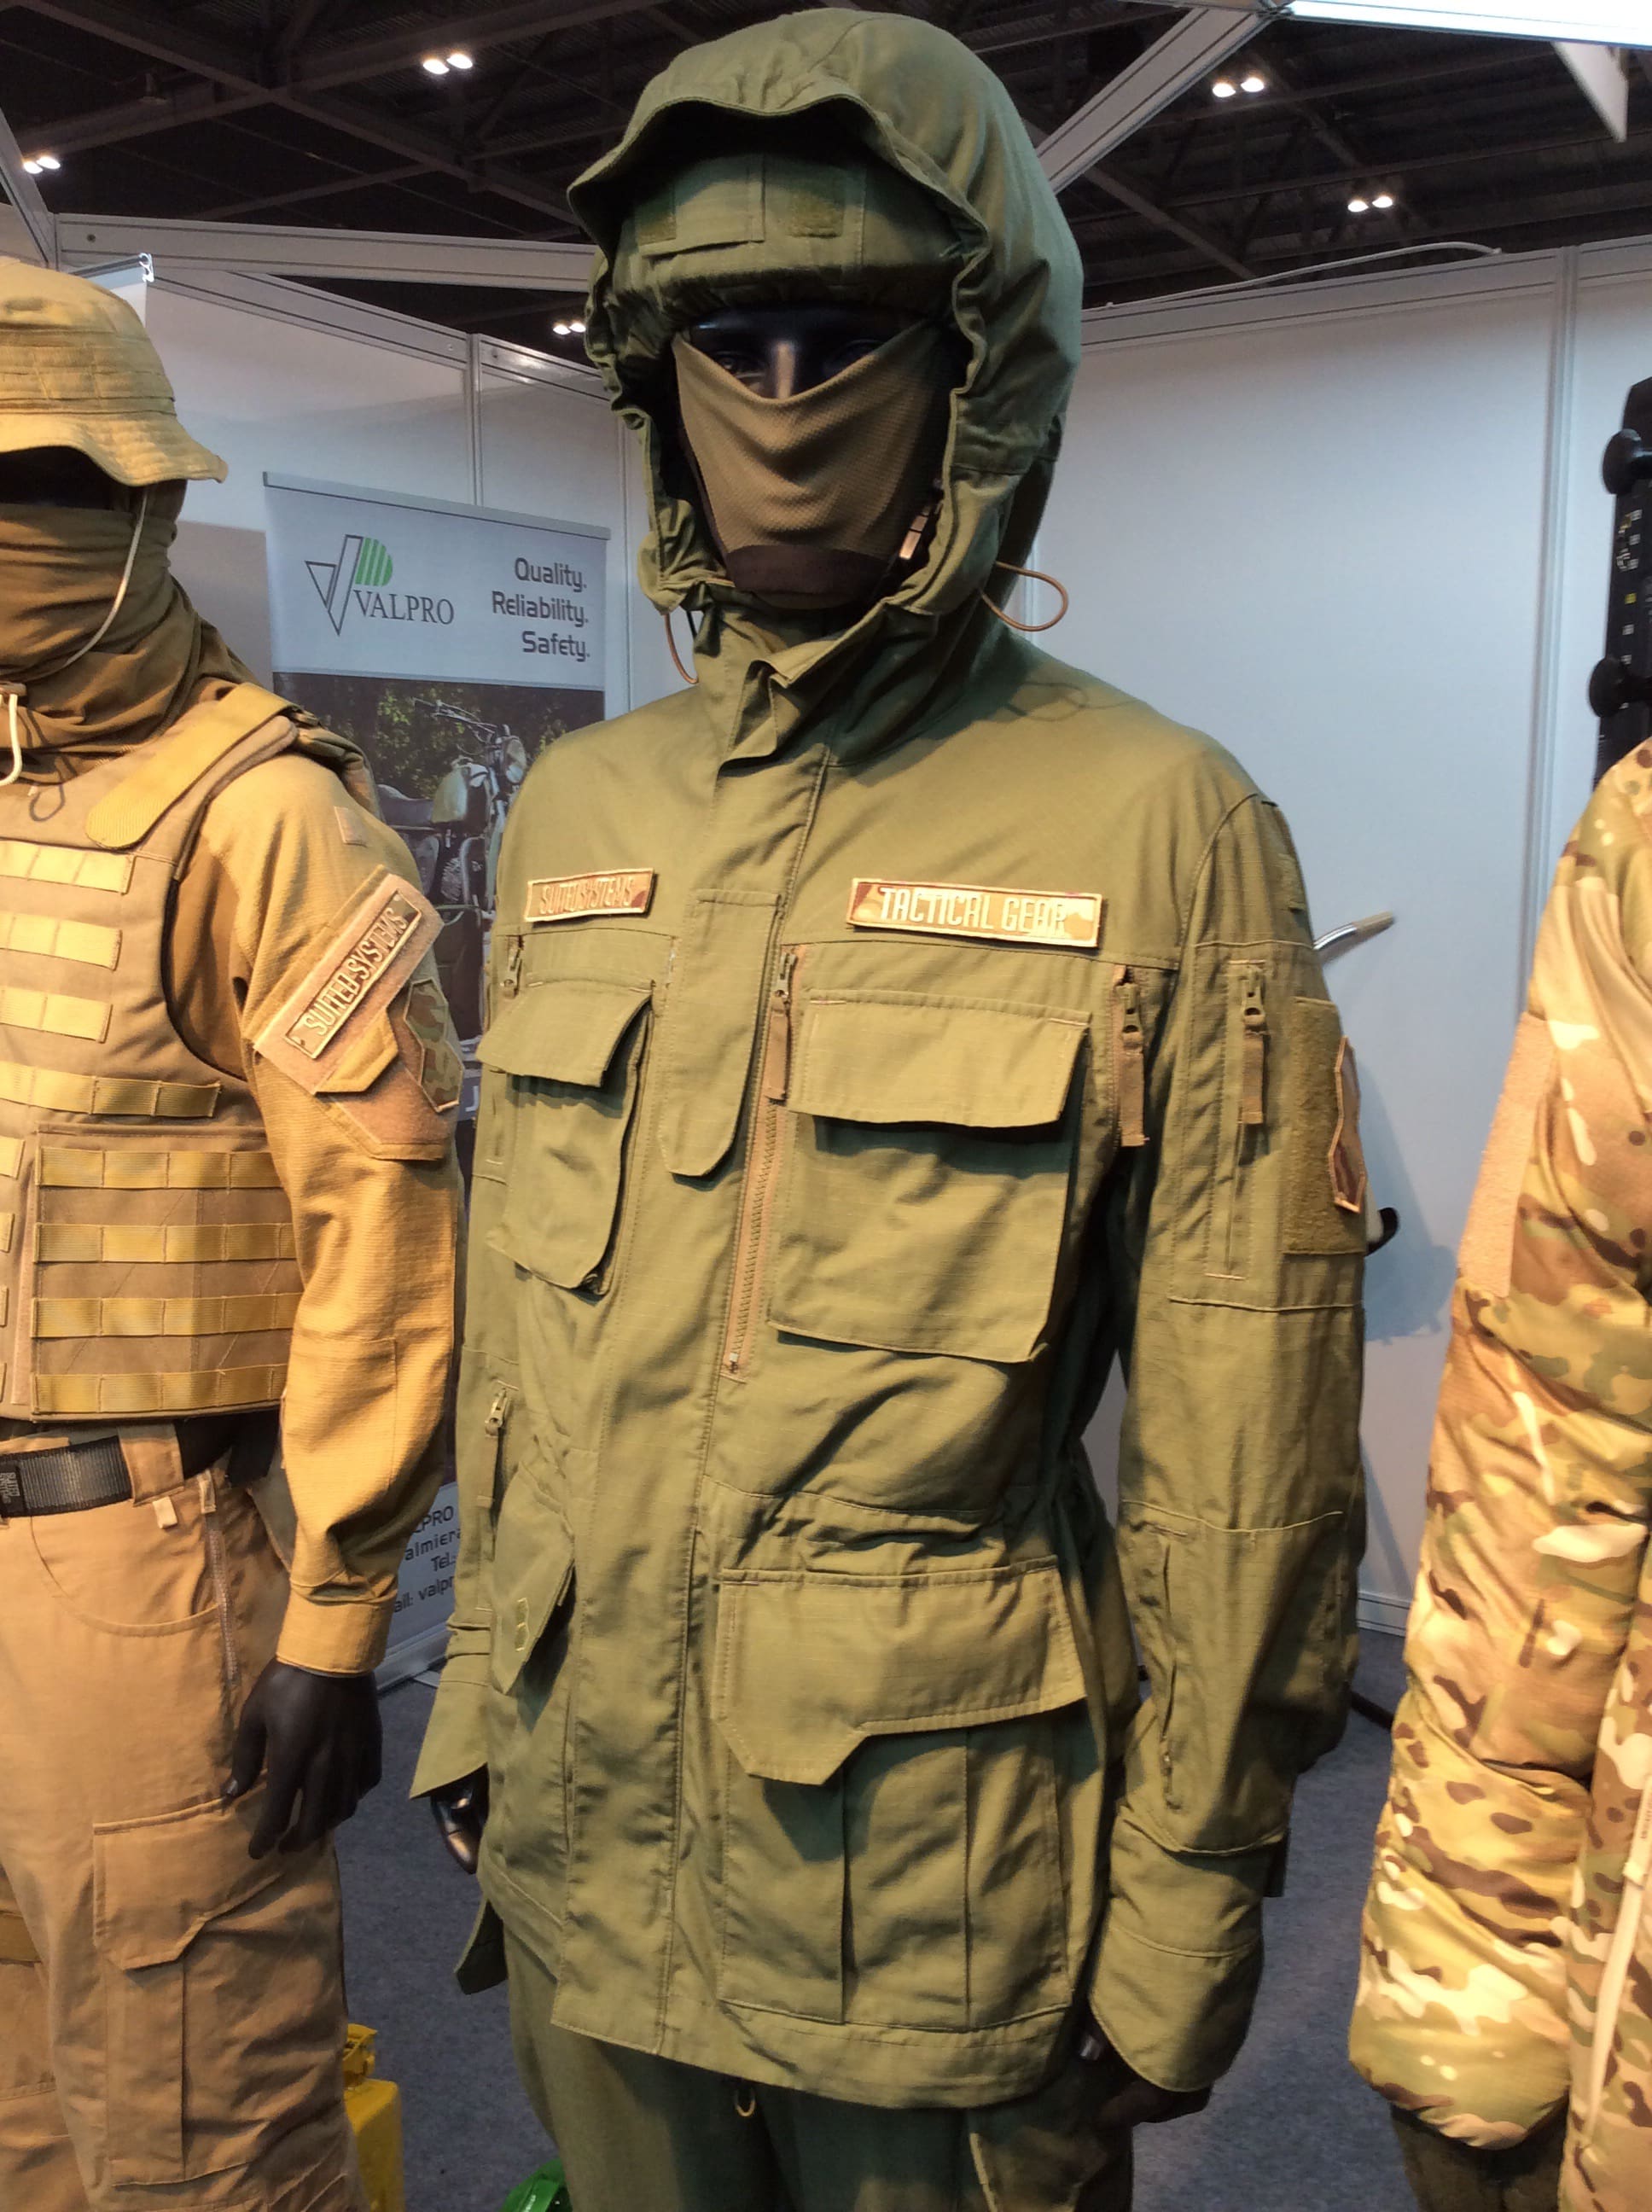 DSEI – Suited Systems - Soldier Systems Daily